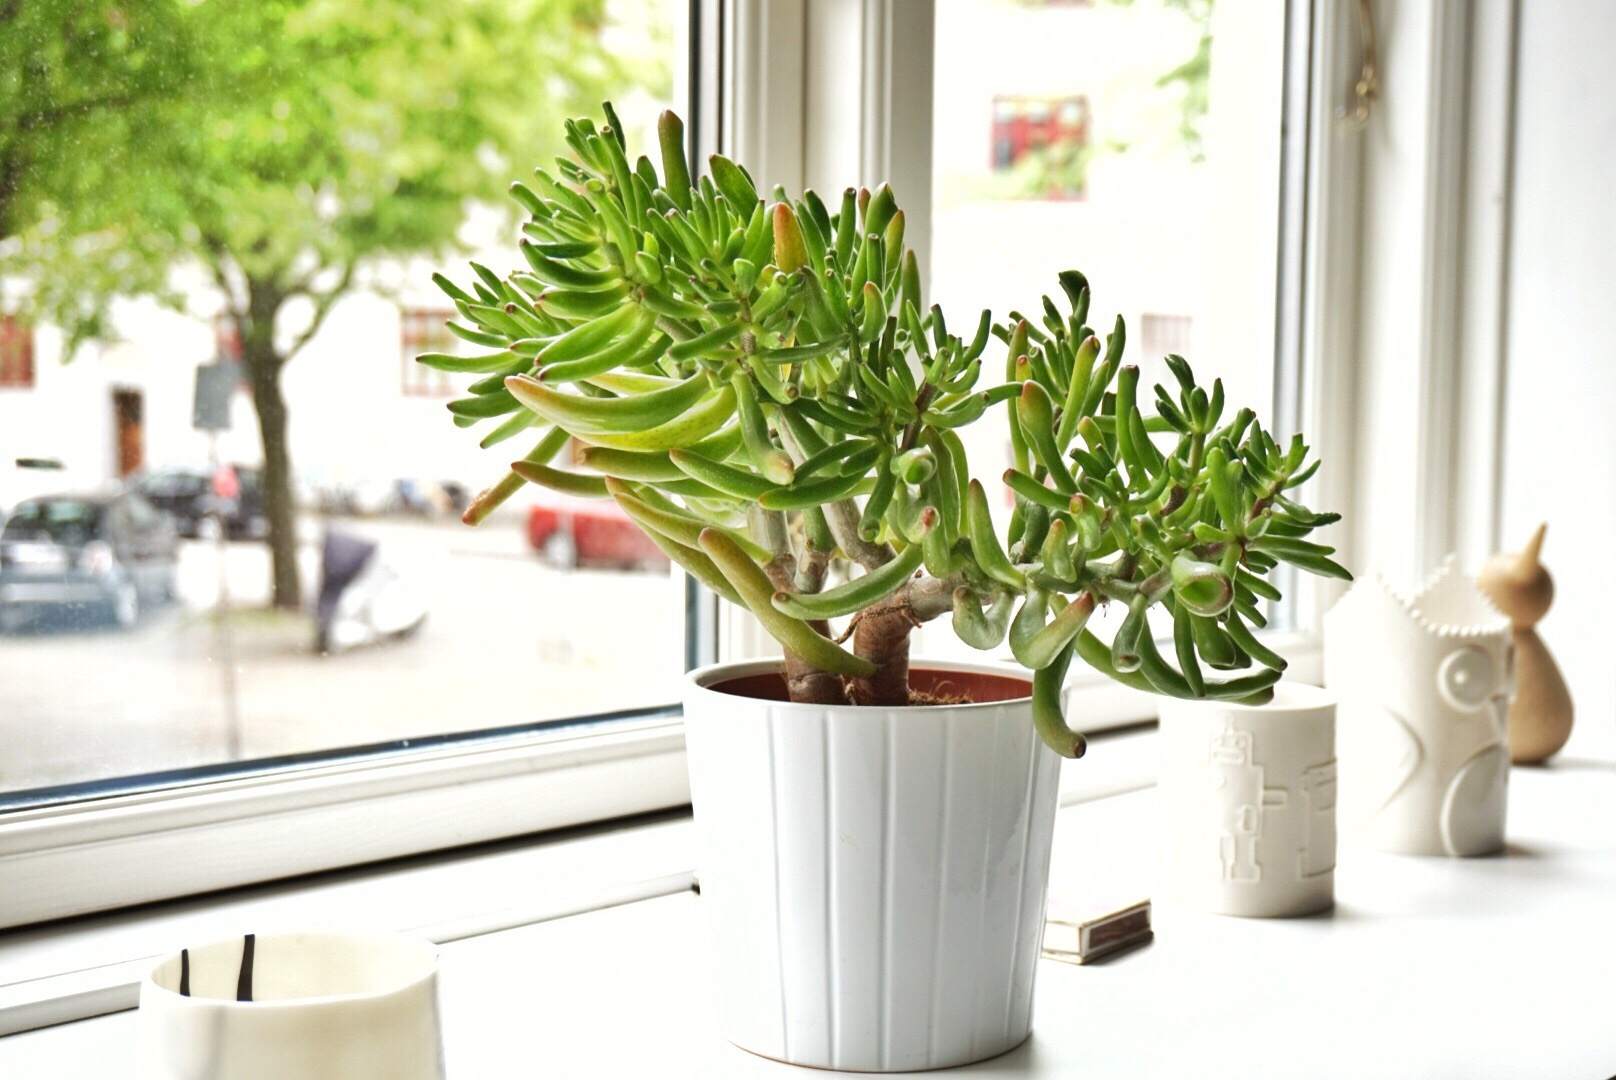 Choose the best location for Bringing Your Plants Indoors